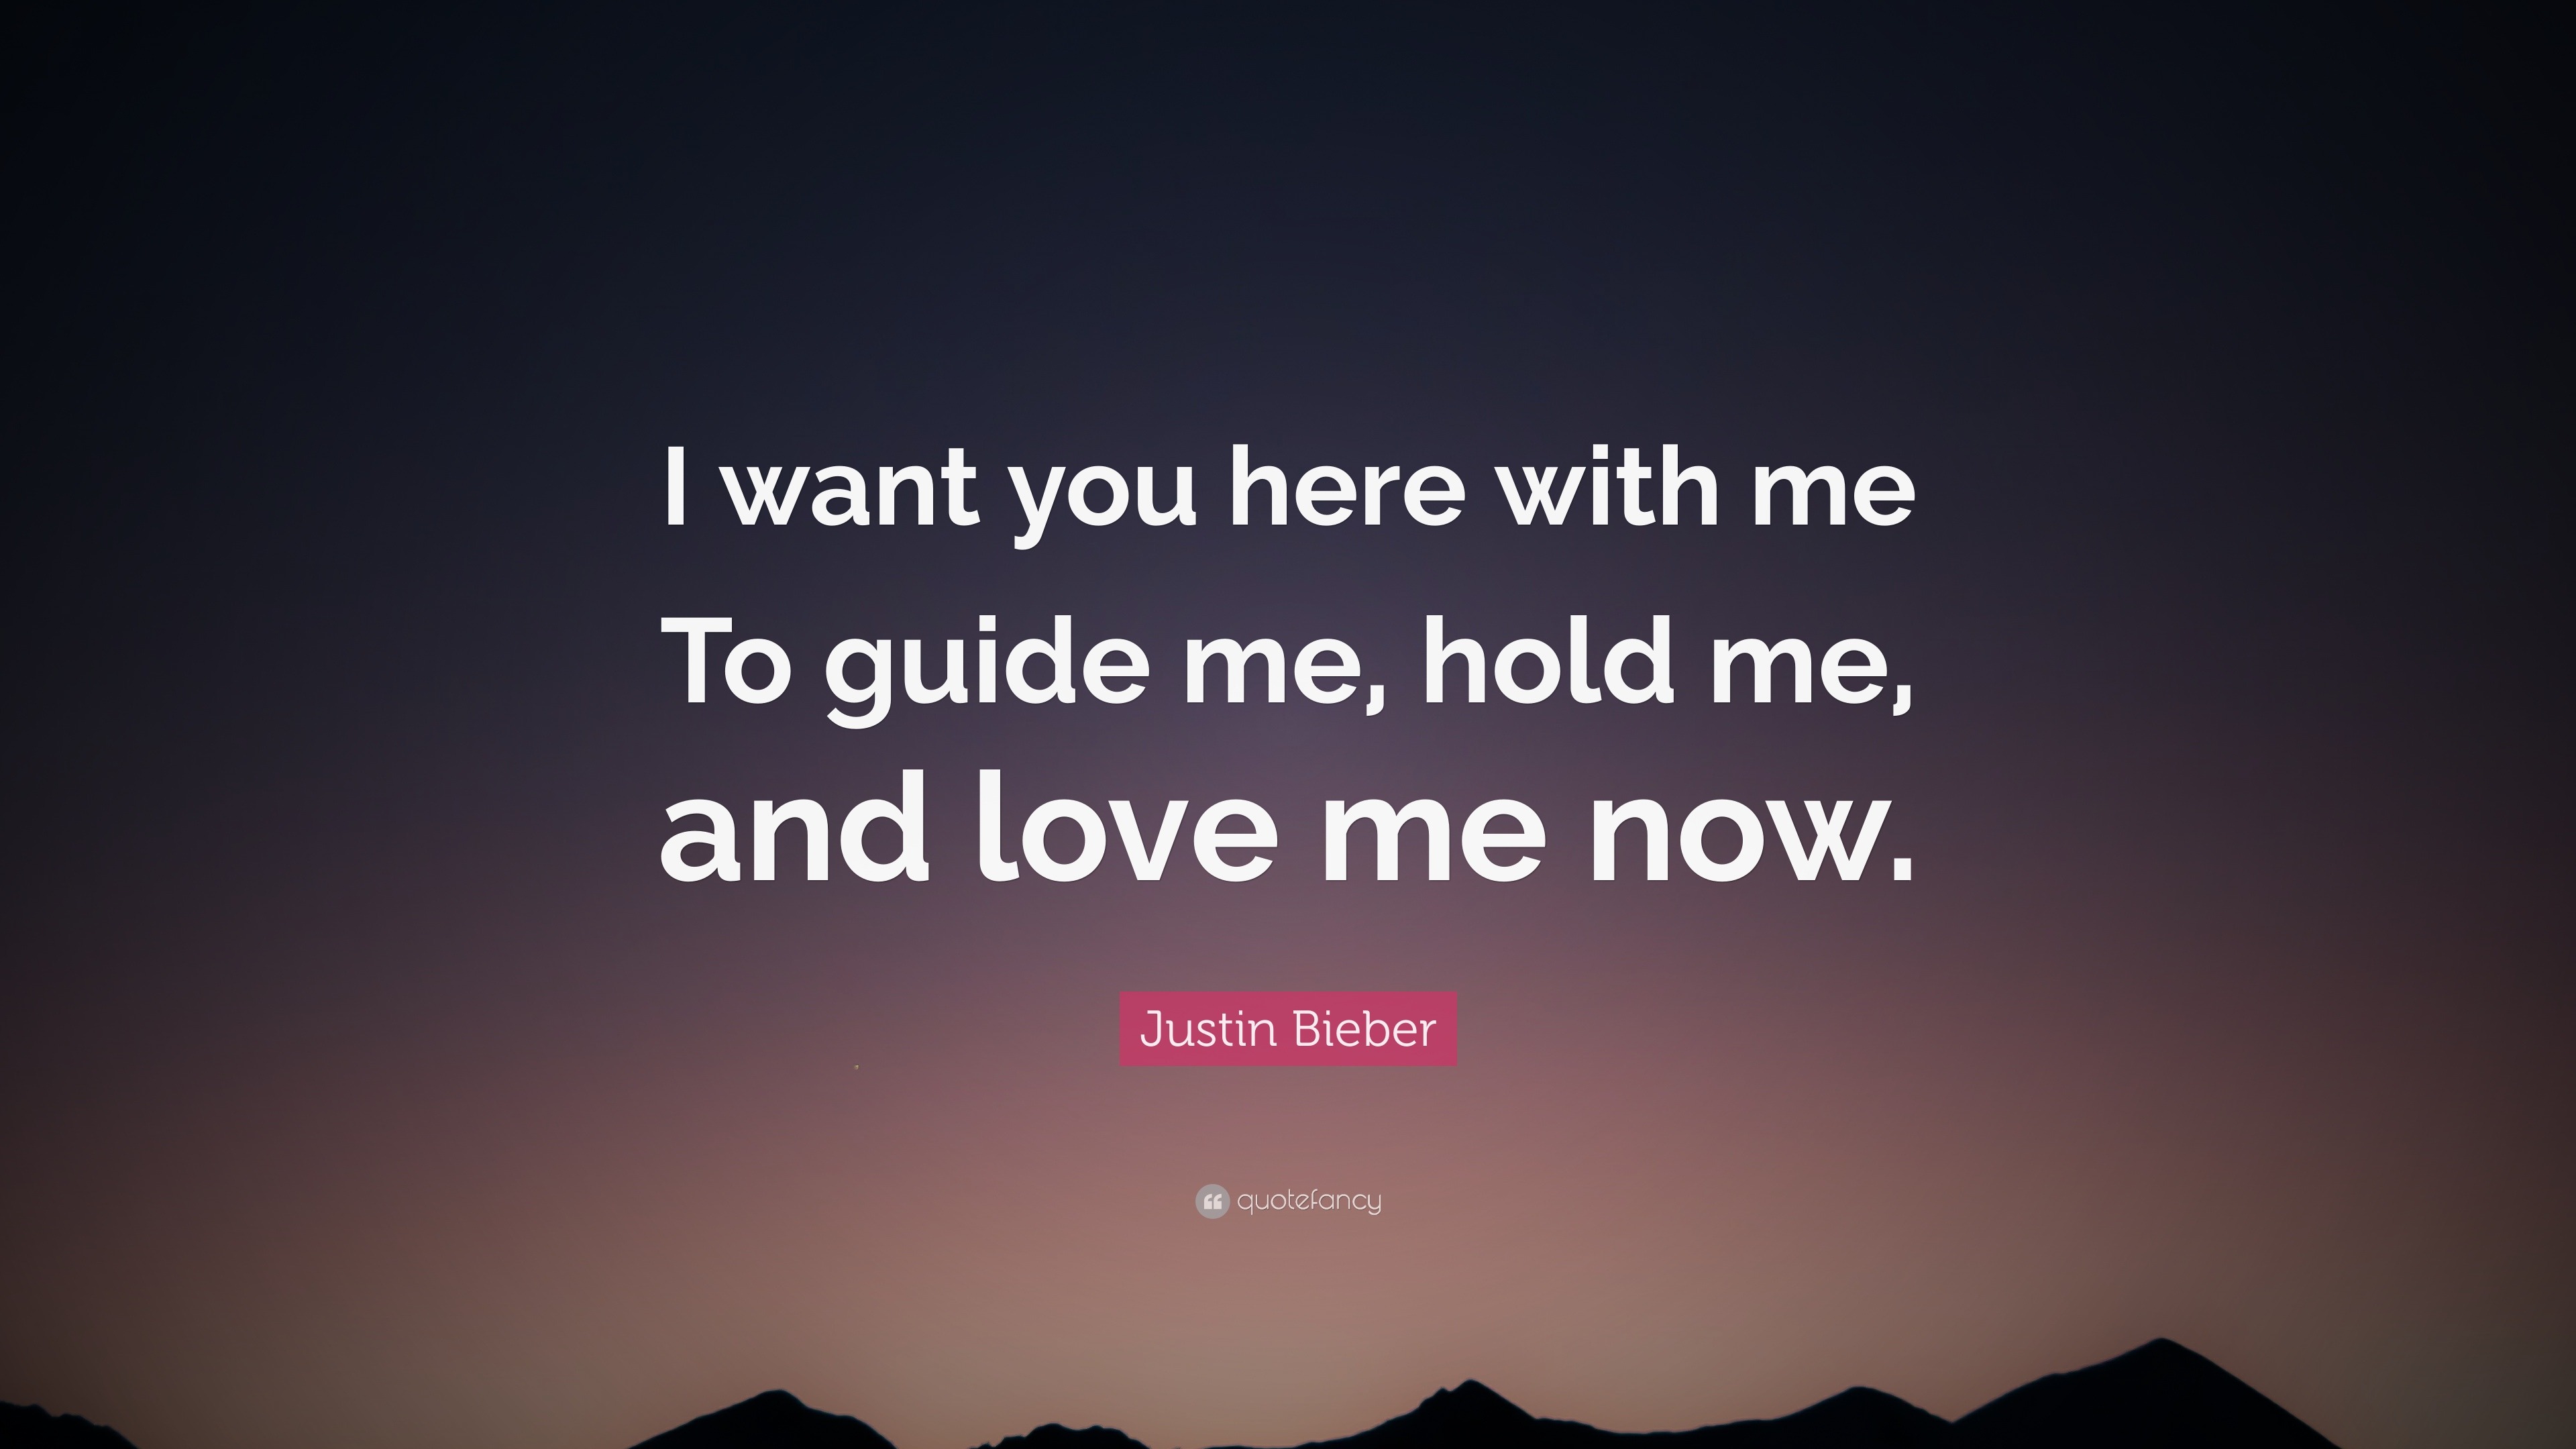 Justin Bieber Quote “I want you here with me To guide me hold